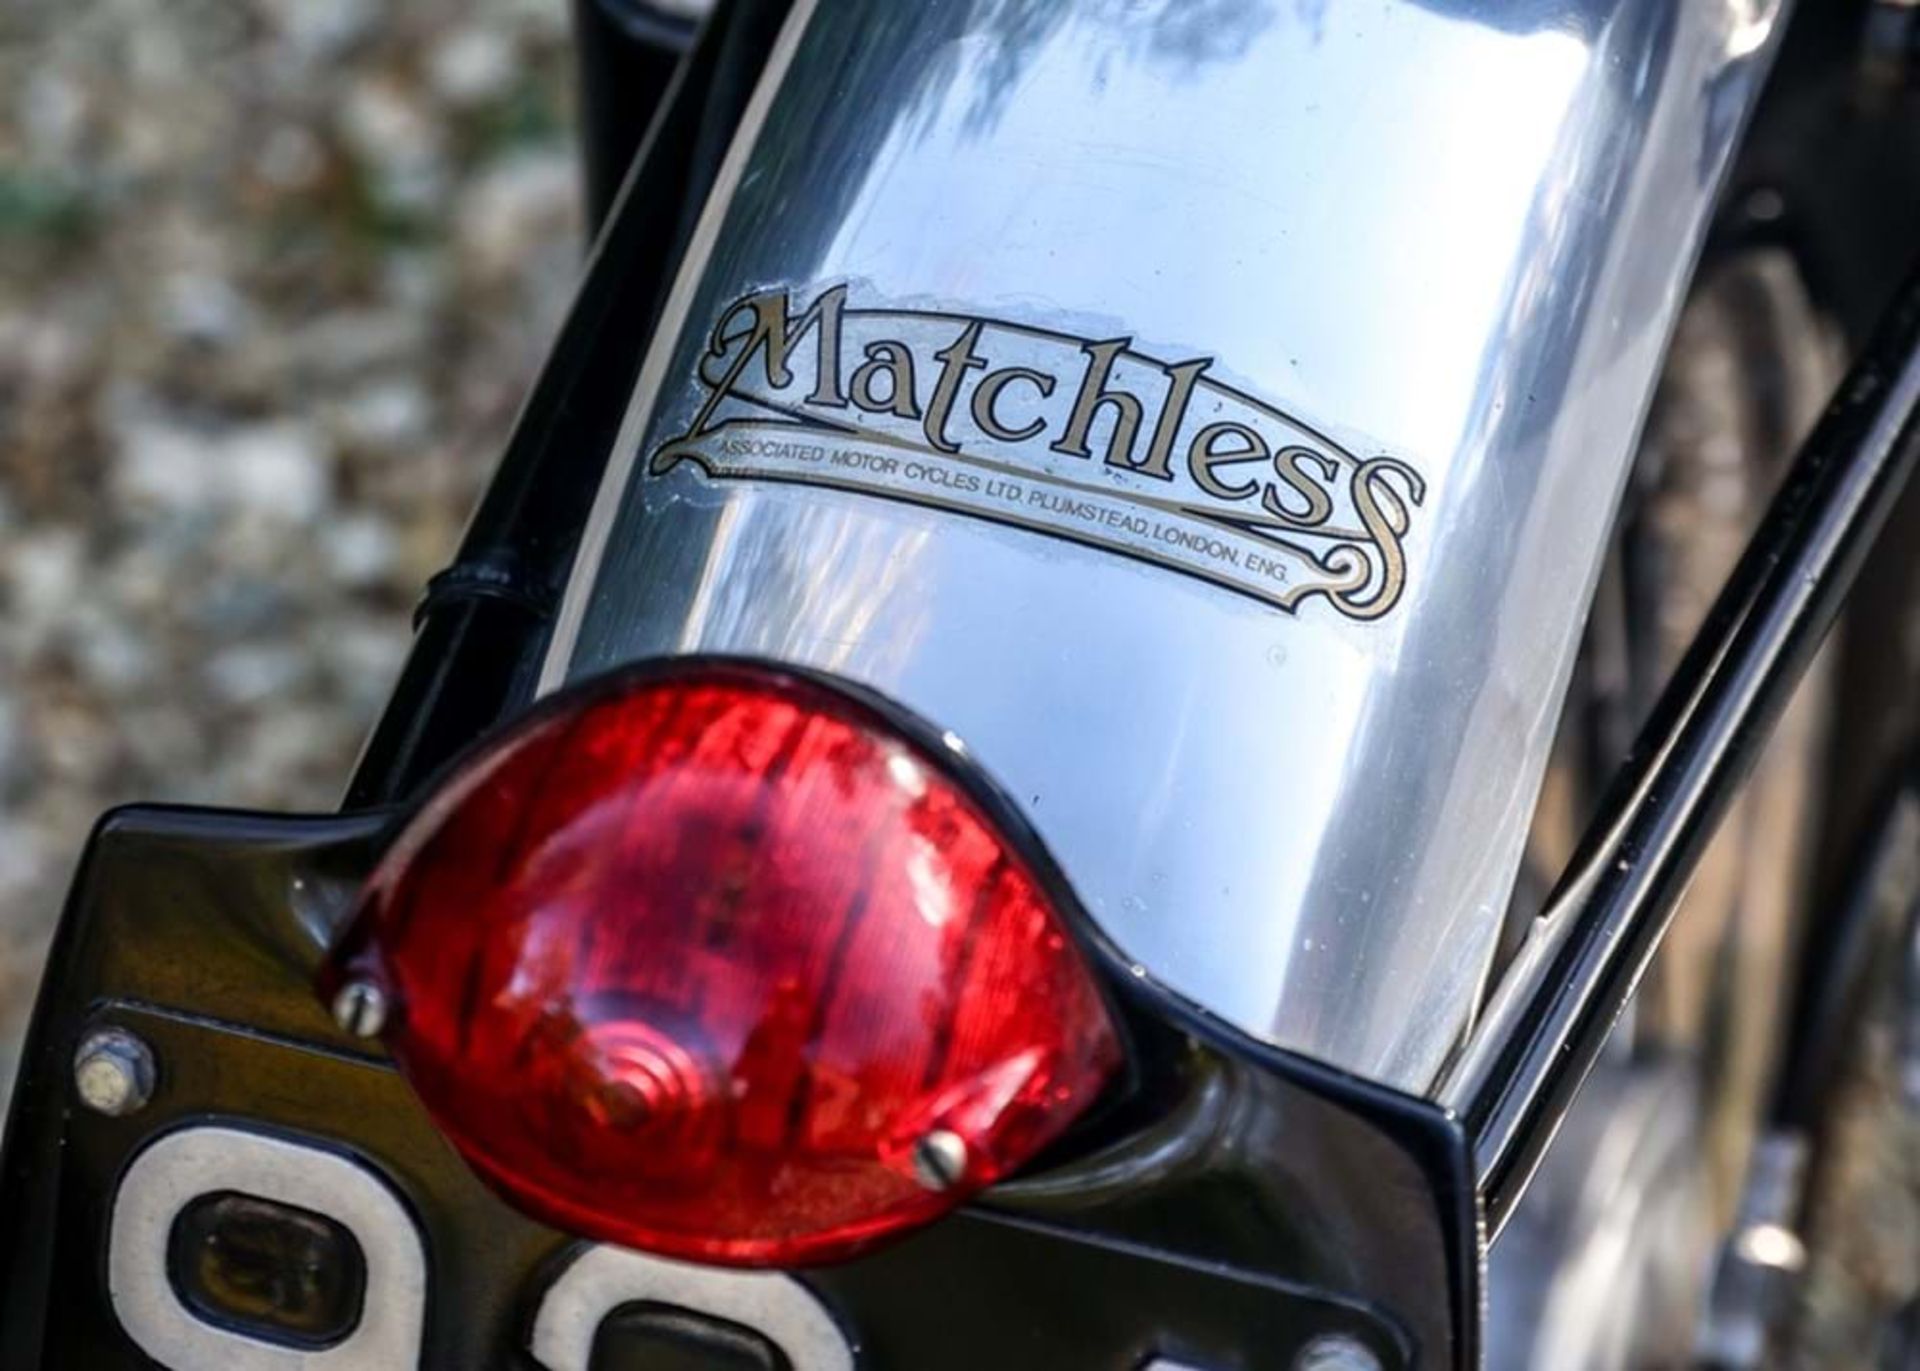 1961 Matchless G12 CSR (650cc) *WITHDRAWN* - Image 4 of 10